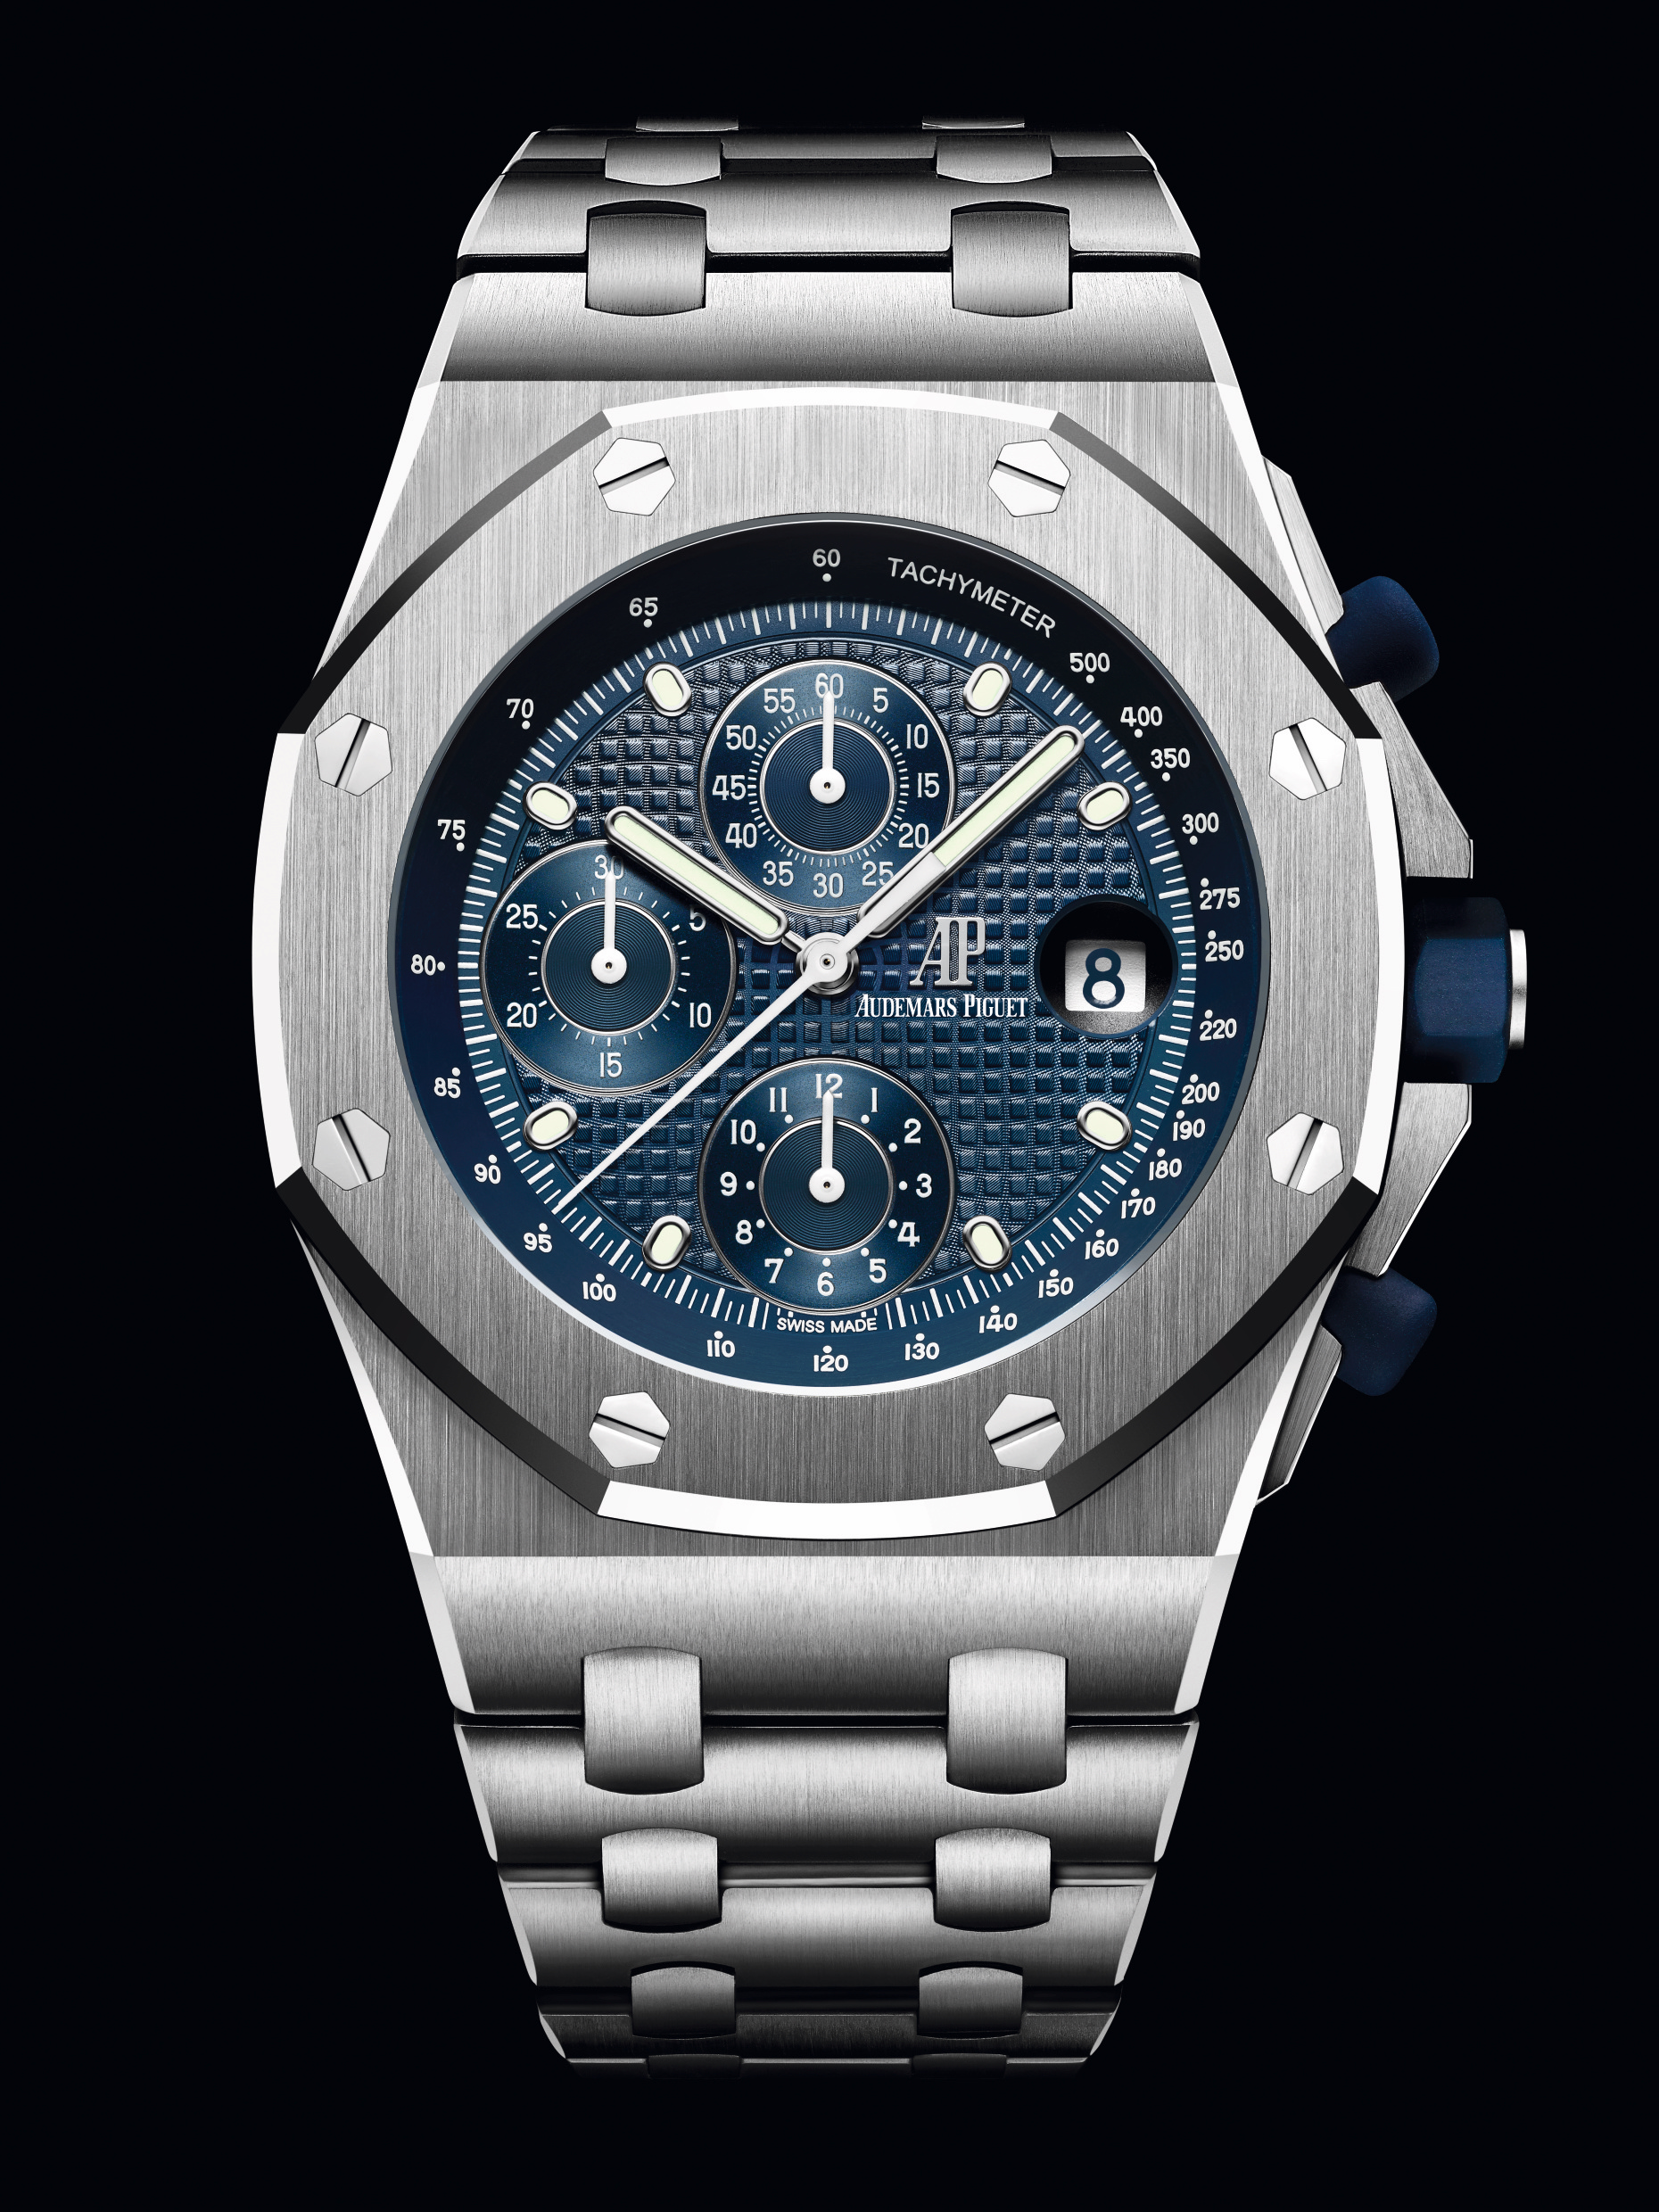 The 2018 re-edition of the original Royal Oak Offshore Selfwinding Chronograph